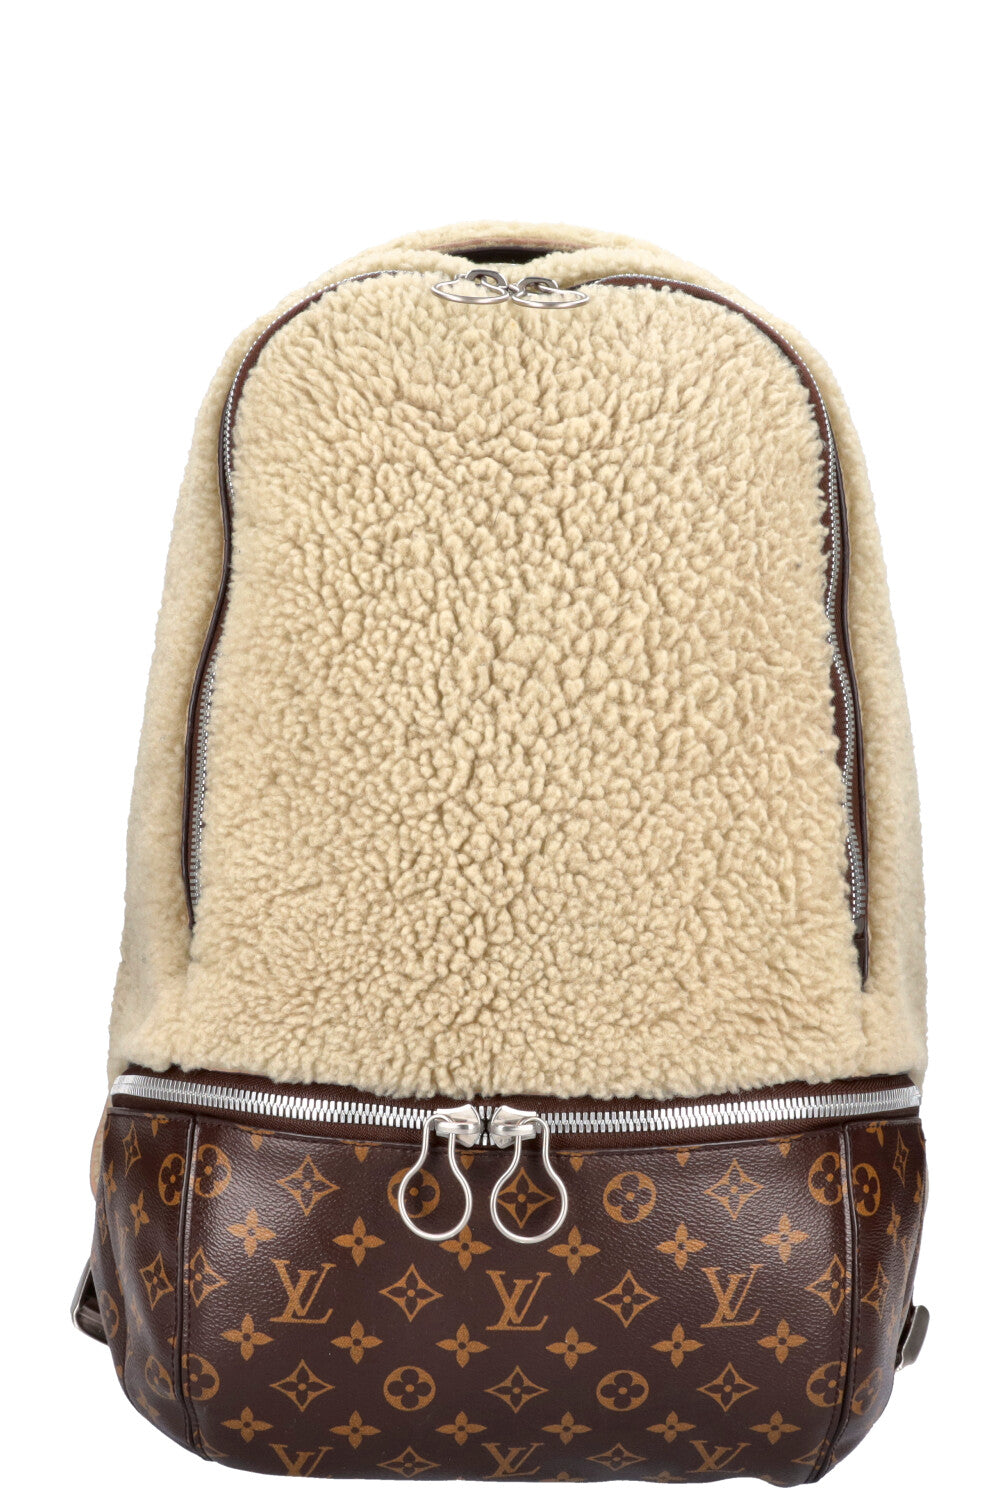 Style: Louis Vuitton 'Shearling' Backpack — Acclaim Magazine